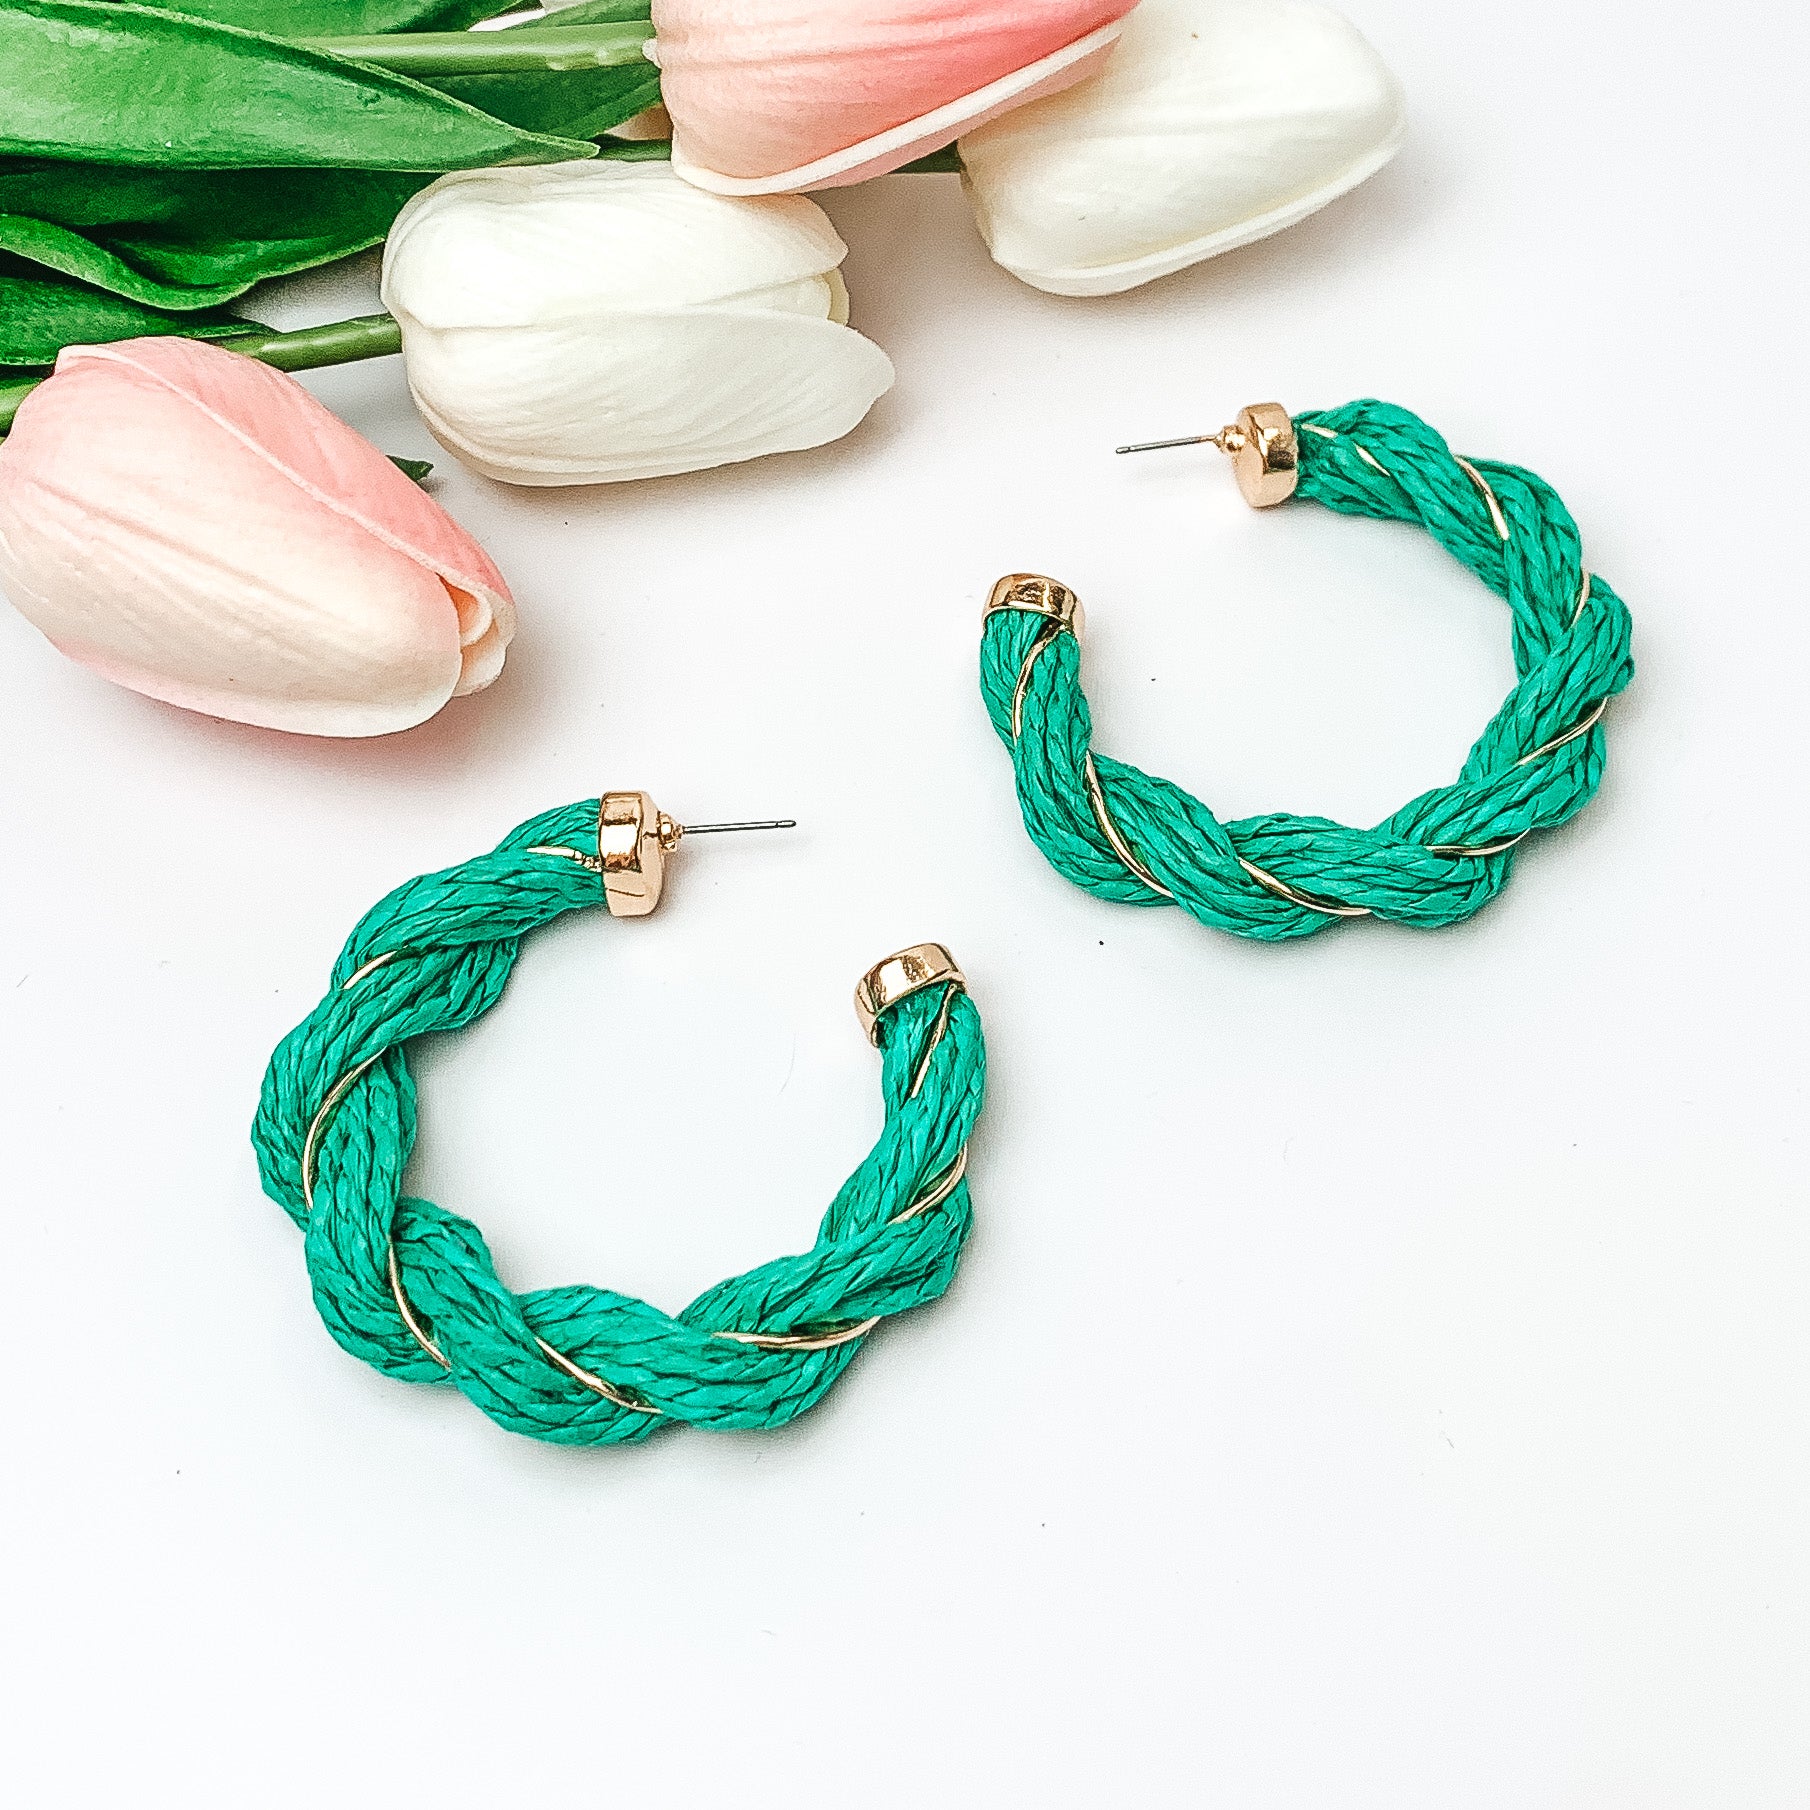 Pictured are teal raffia twisted hoop earrings with gold detailing.  They are pictured with pink and white tulips on a white background.